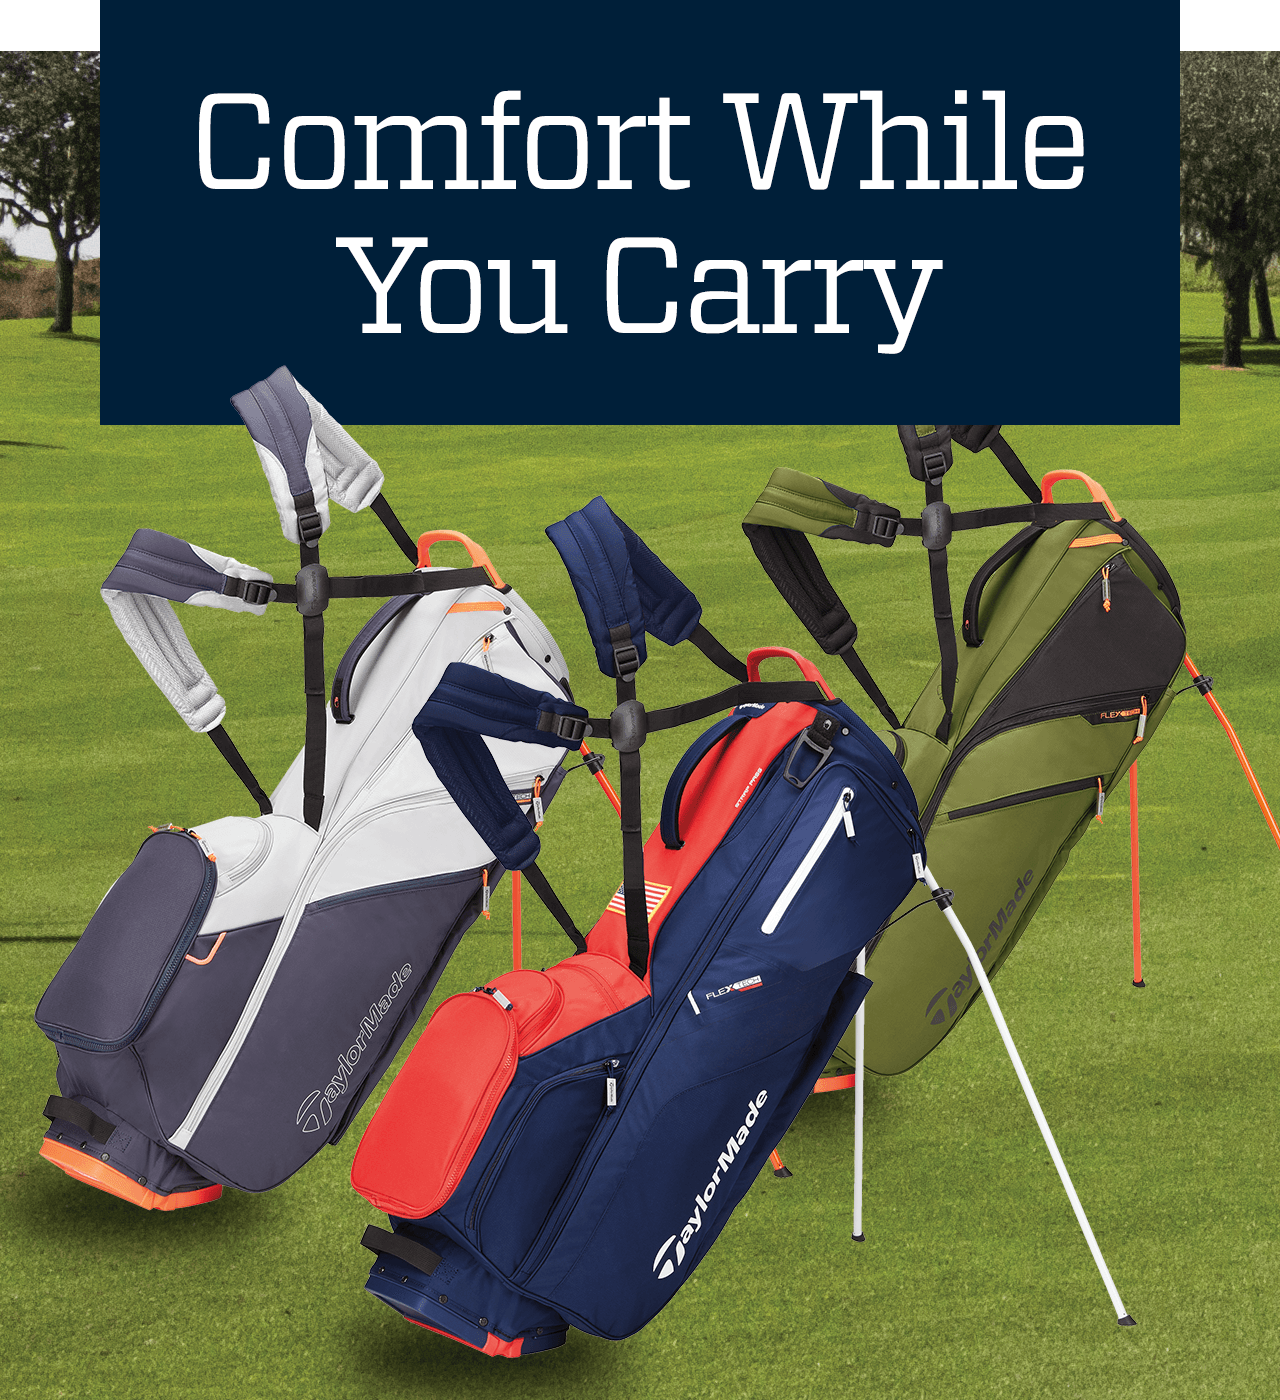 Comfort while you carry.